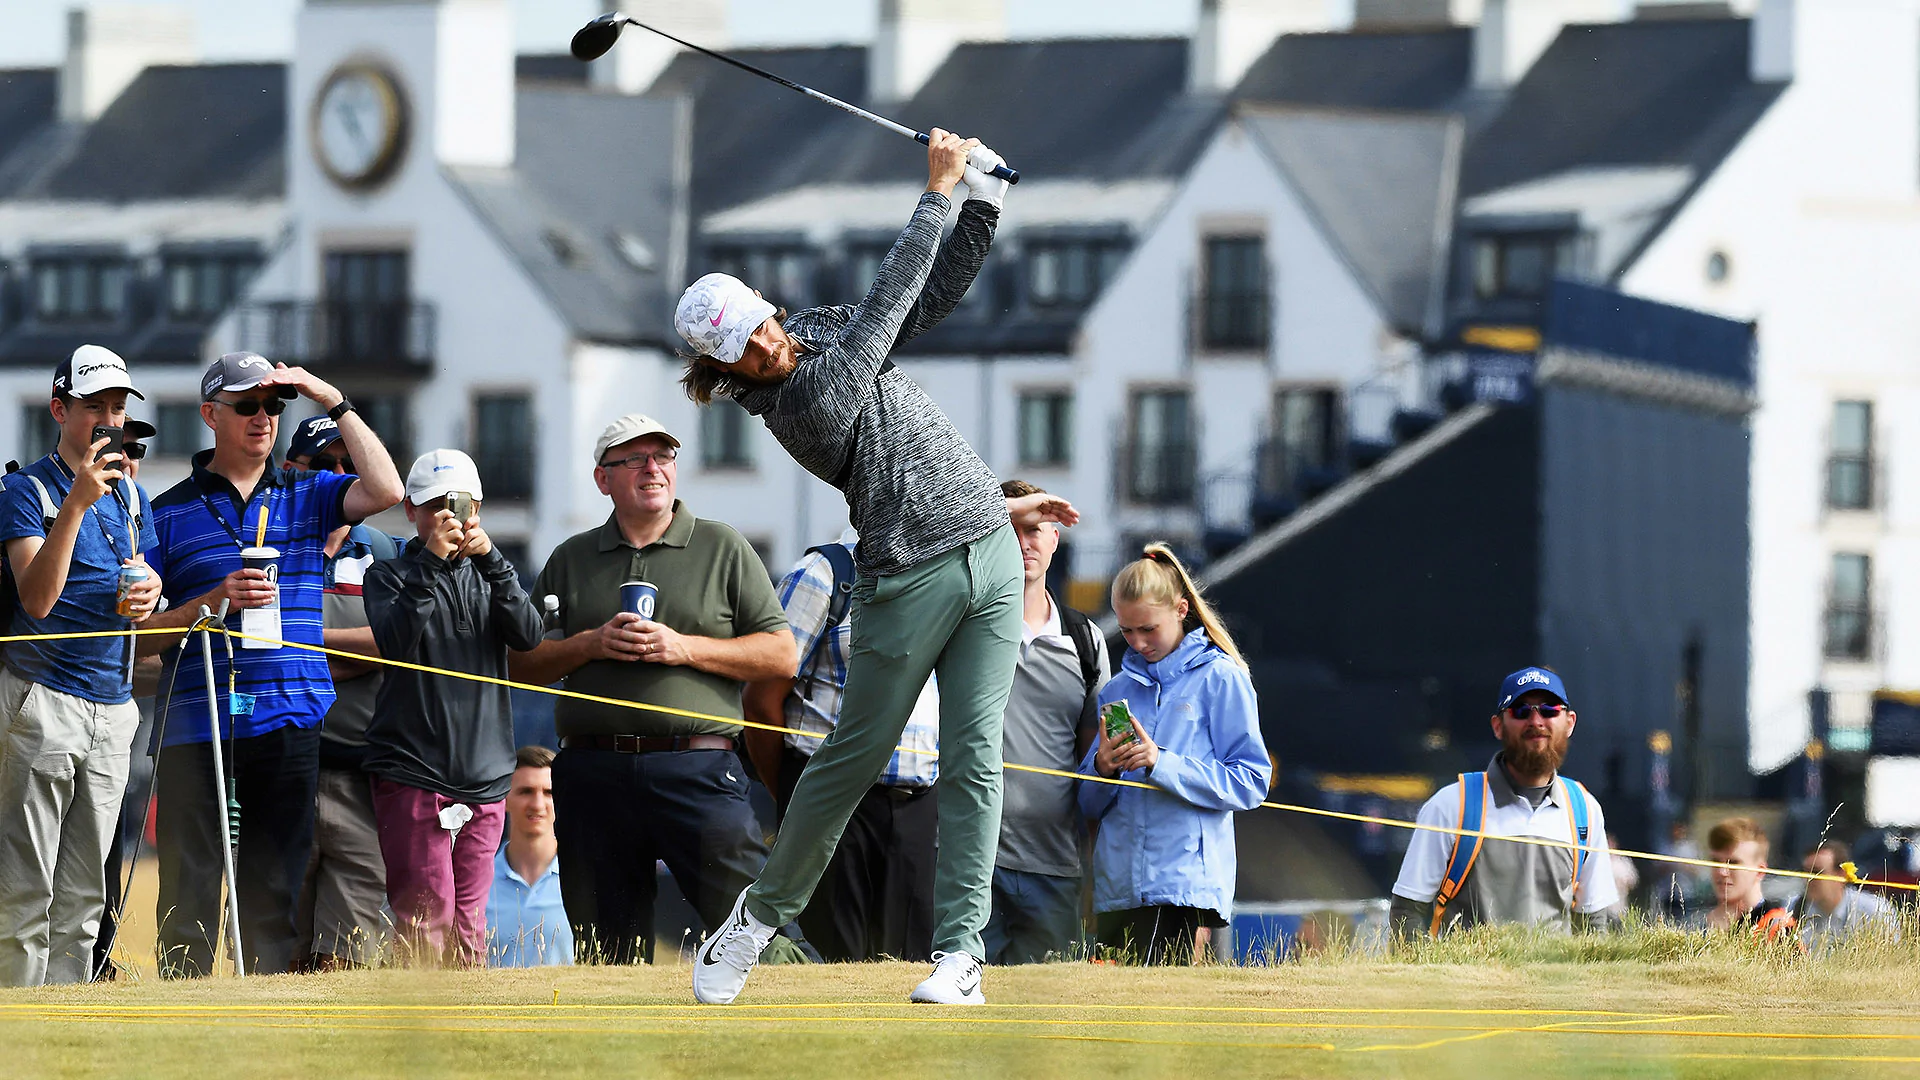 Fleetwood: Carnoustie course record won't help at Open